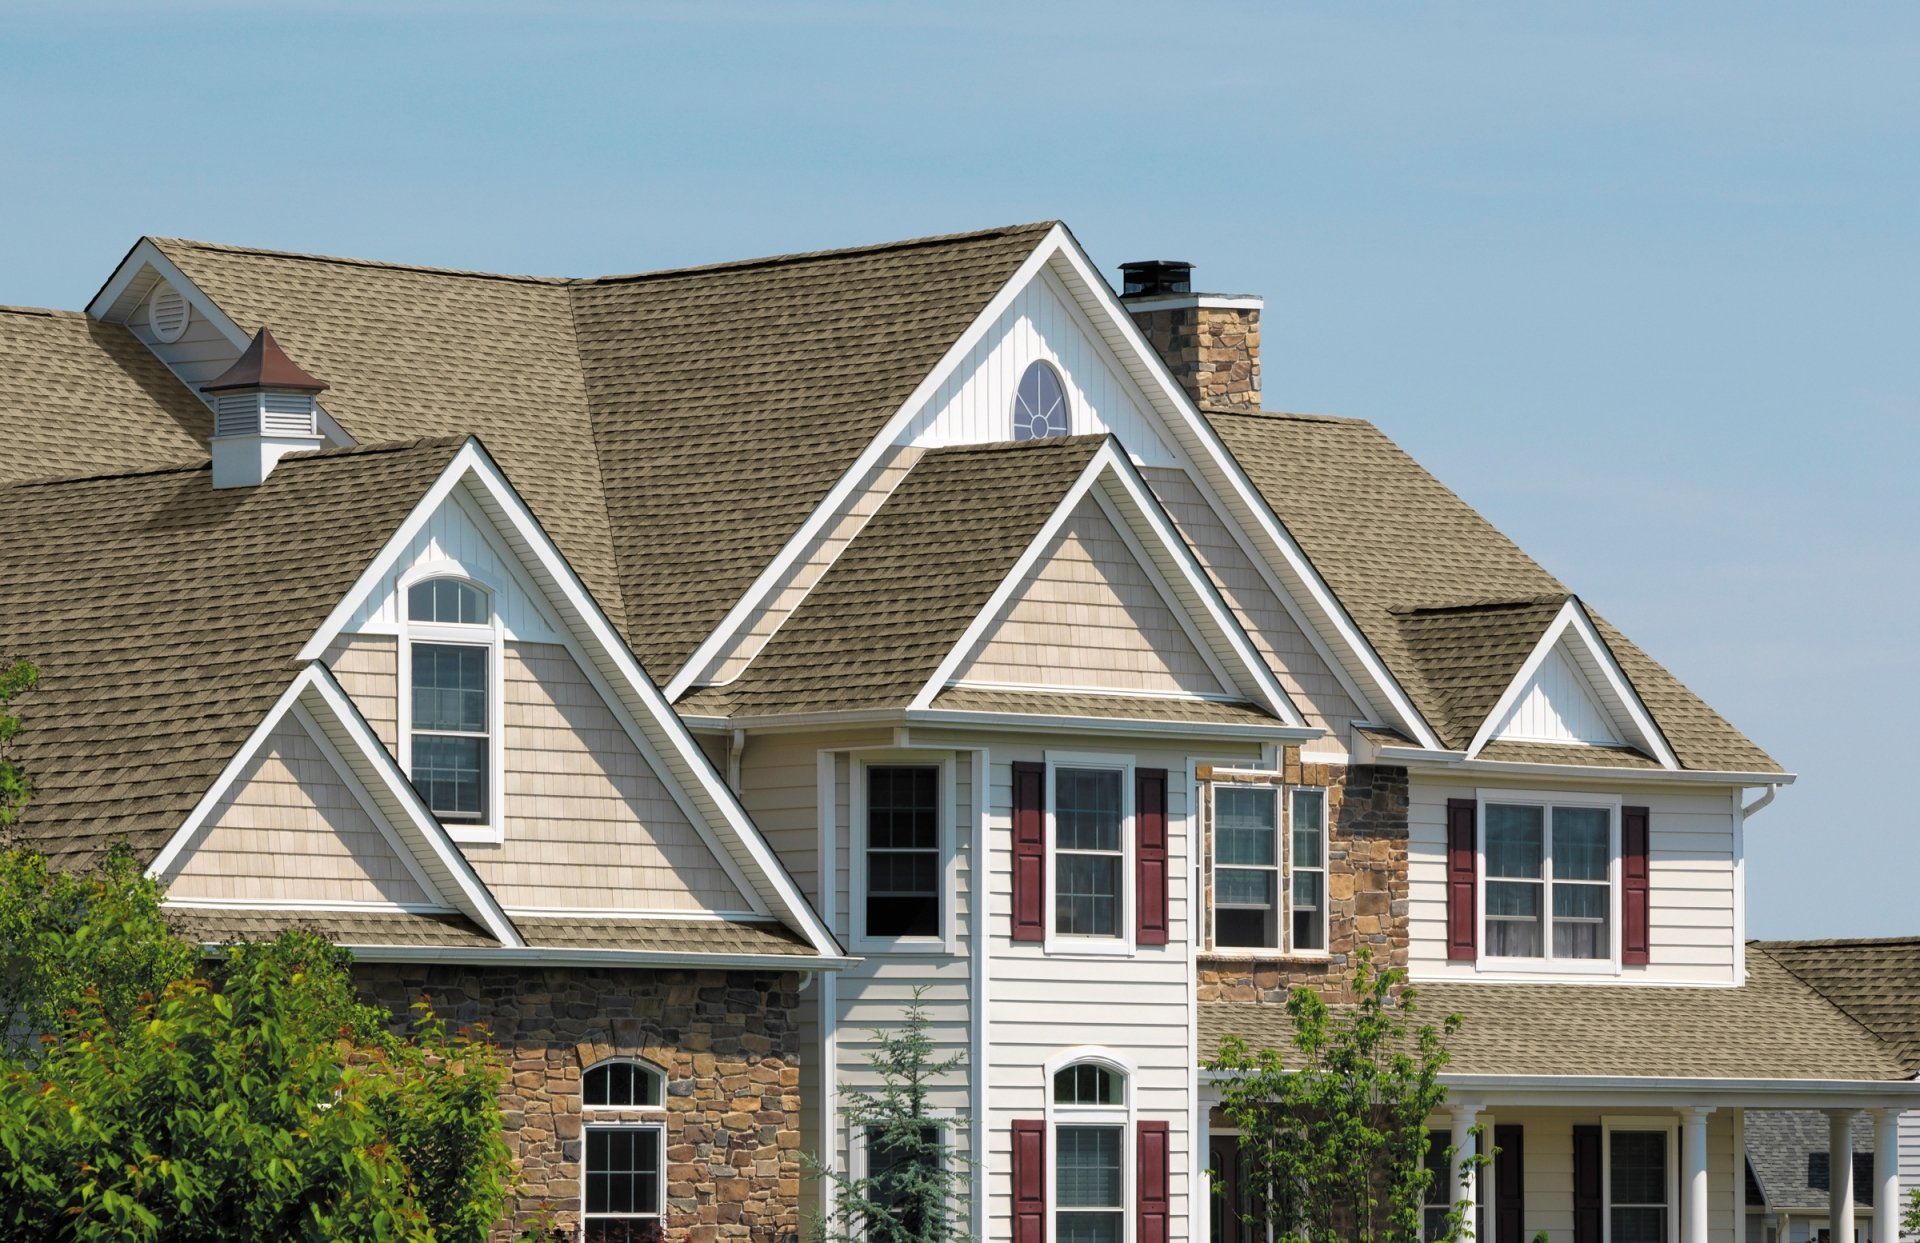 We are one of the BEST Roofing Companies in Belvidere Illinois!